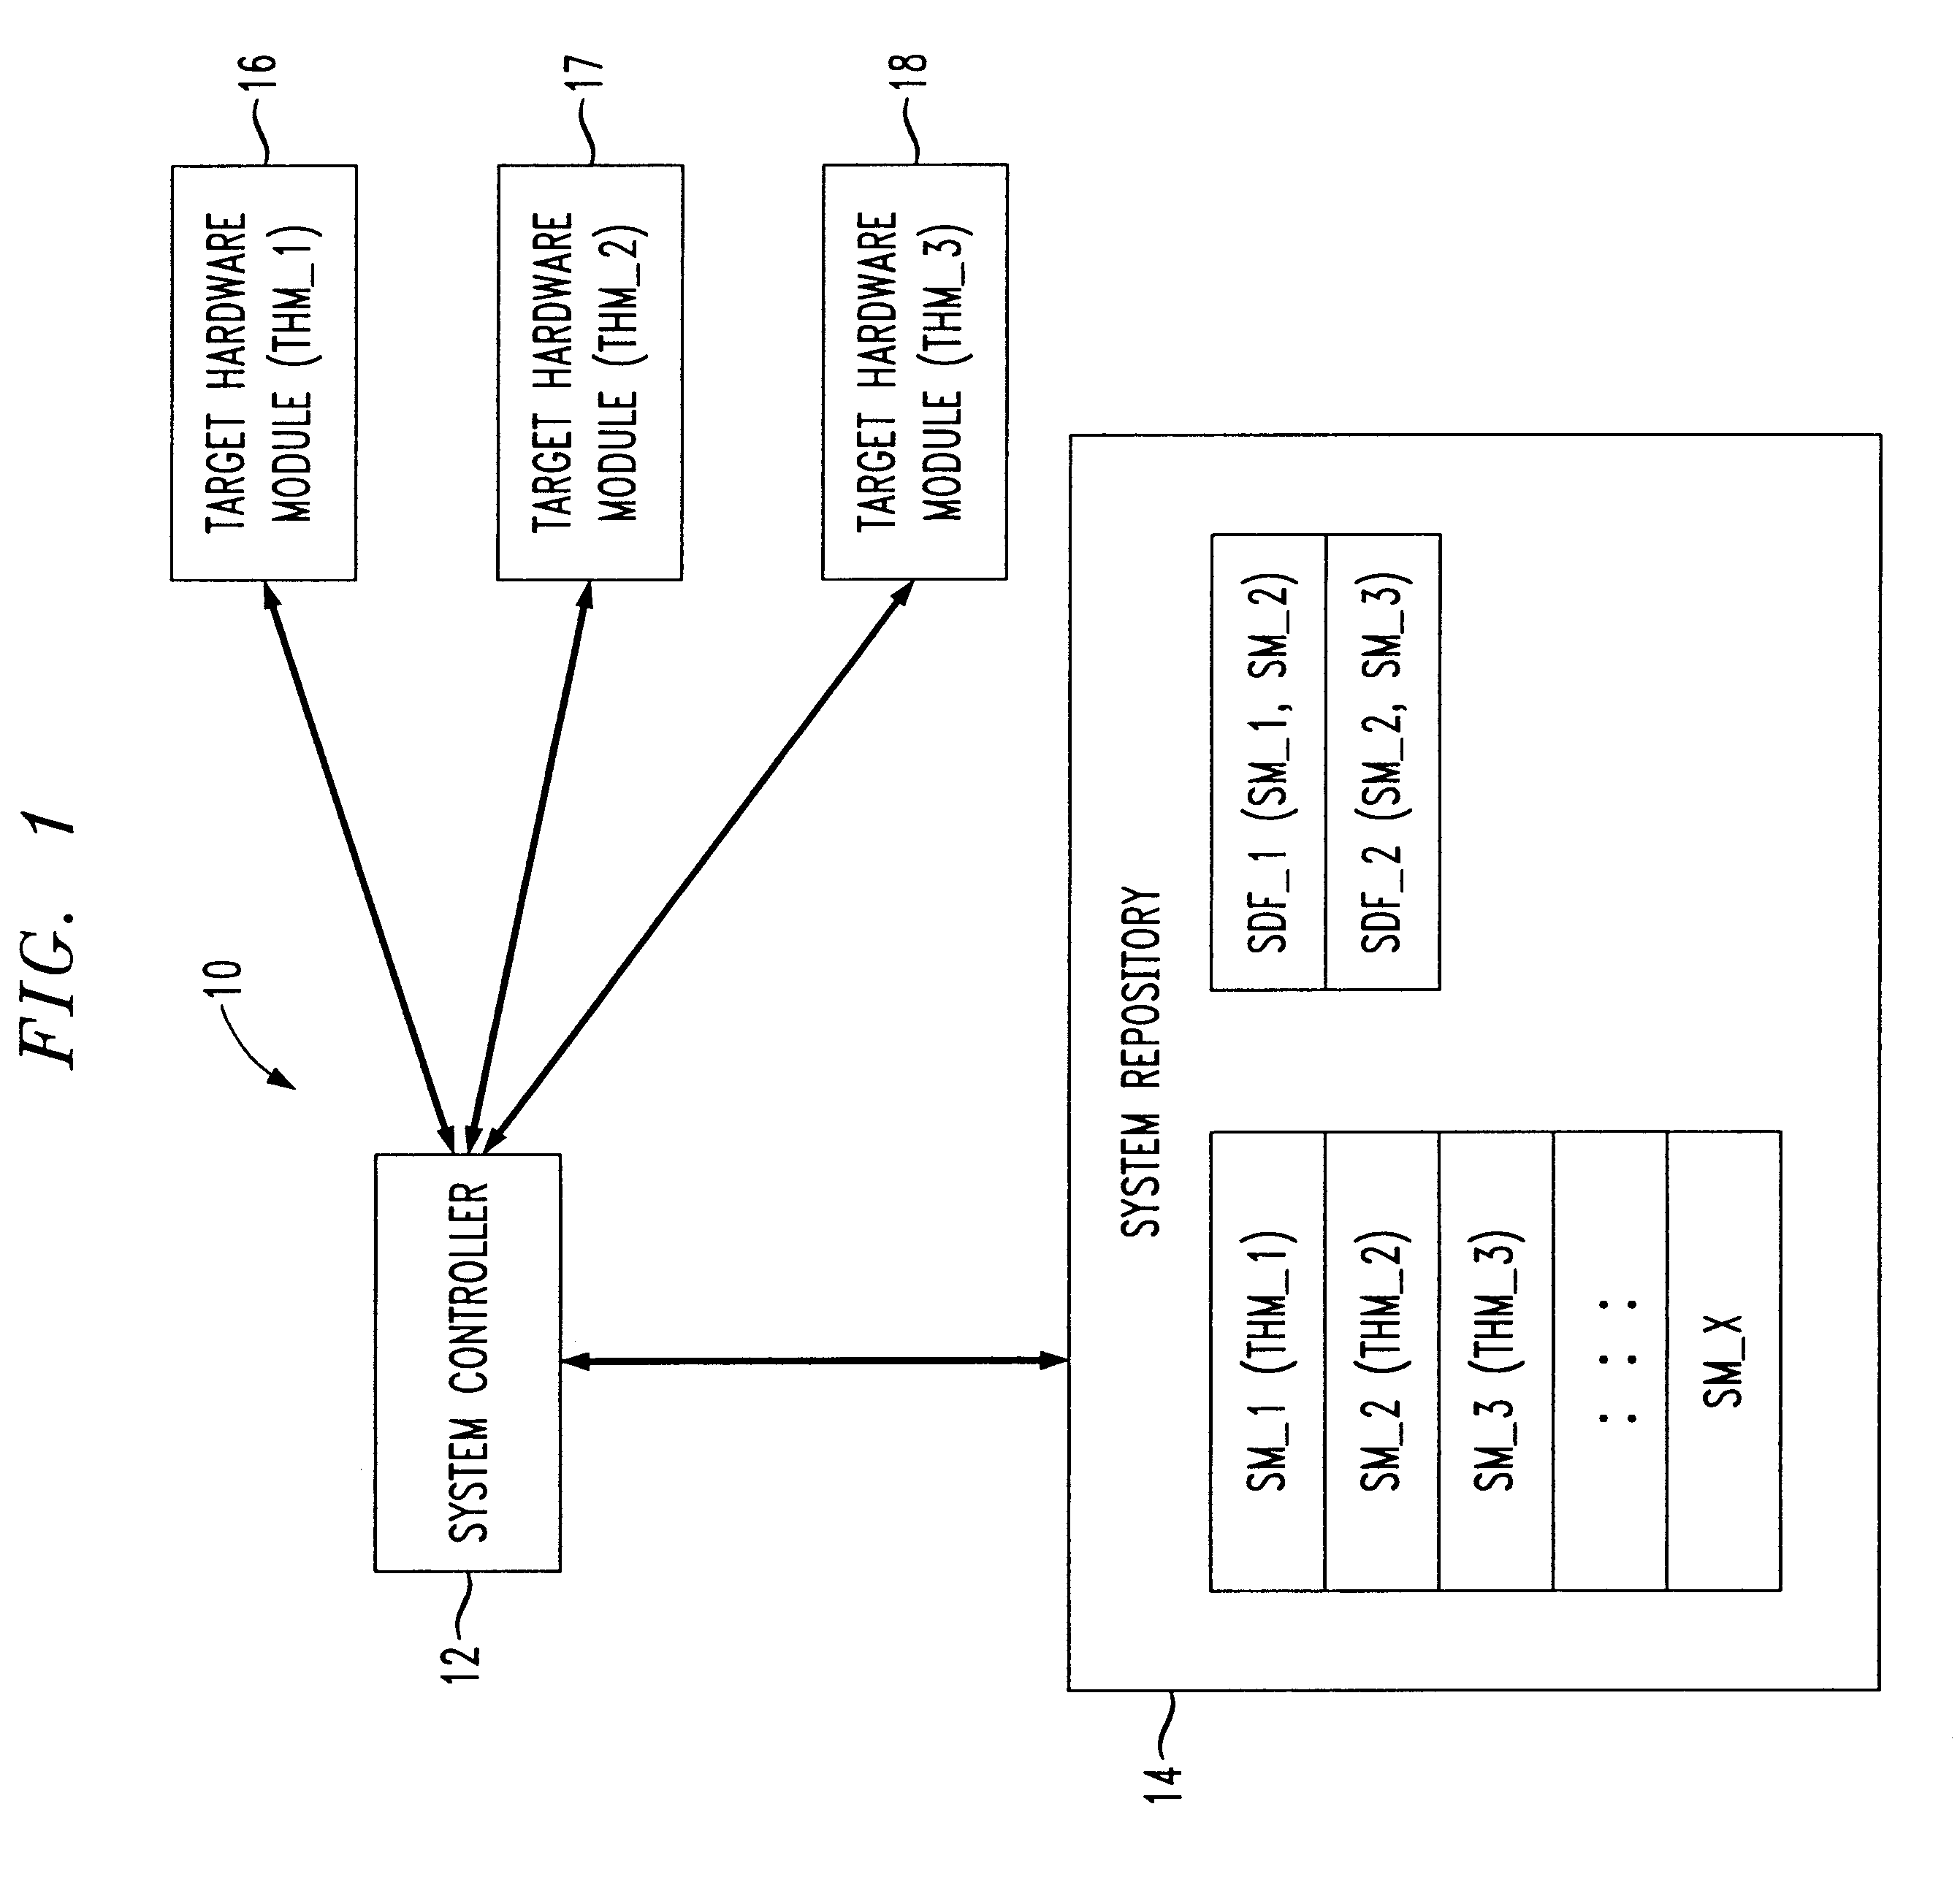 System and method for improved software configuration and control management in multi-module systems